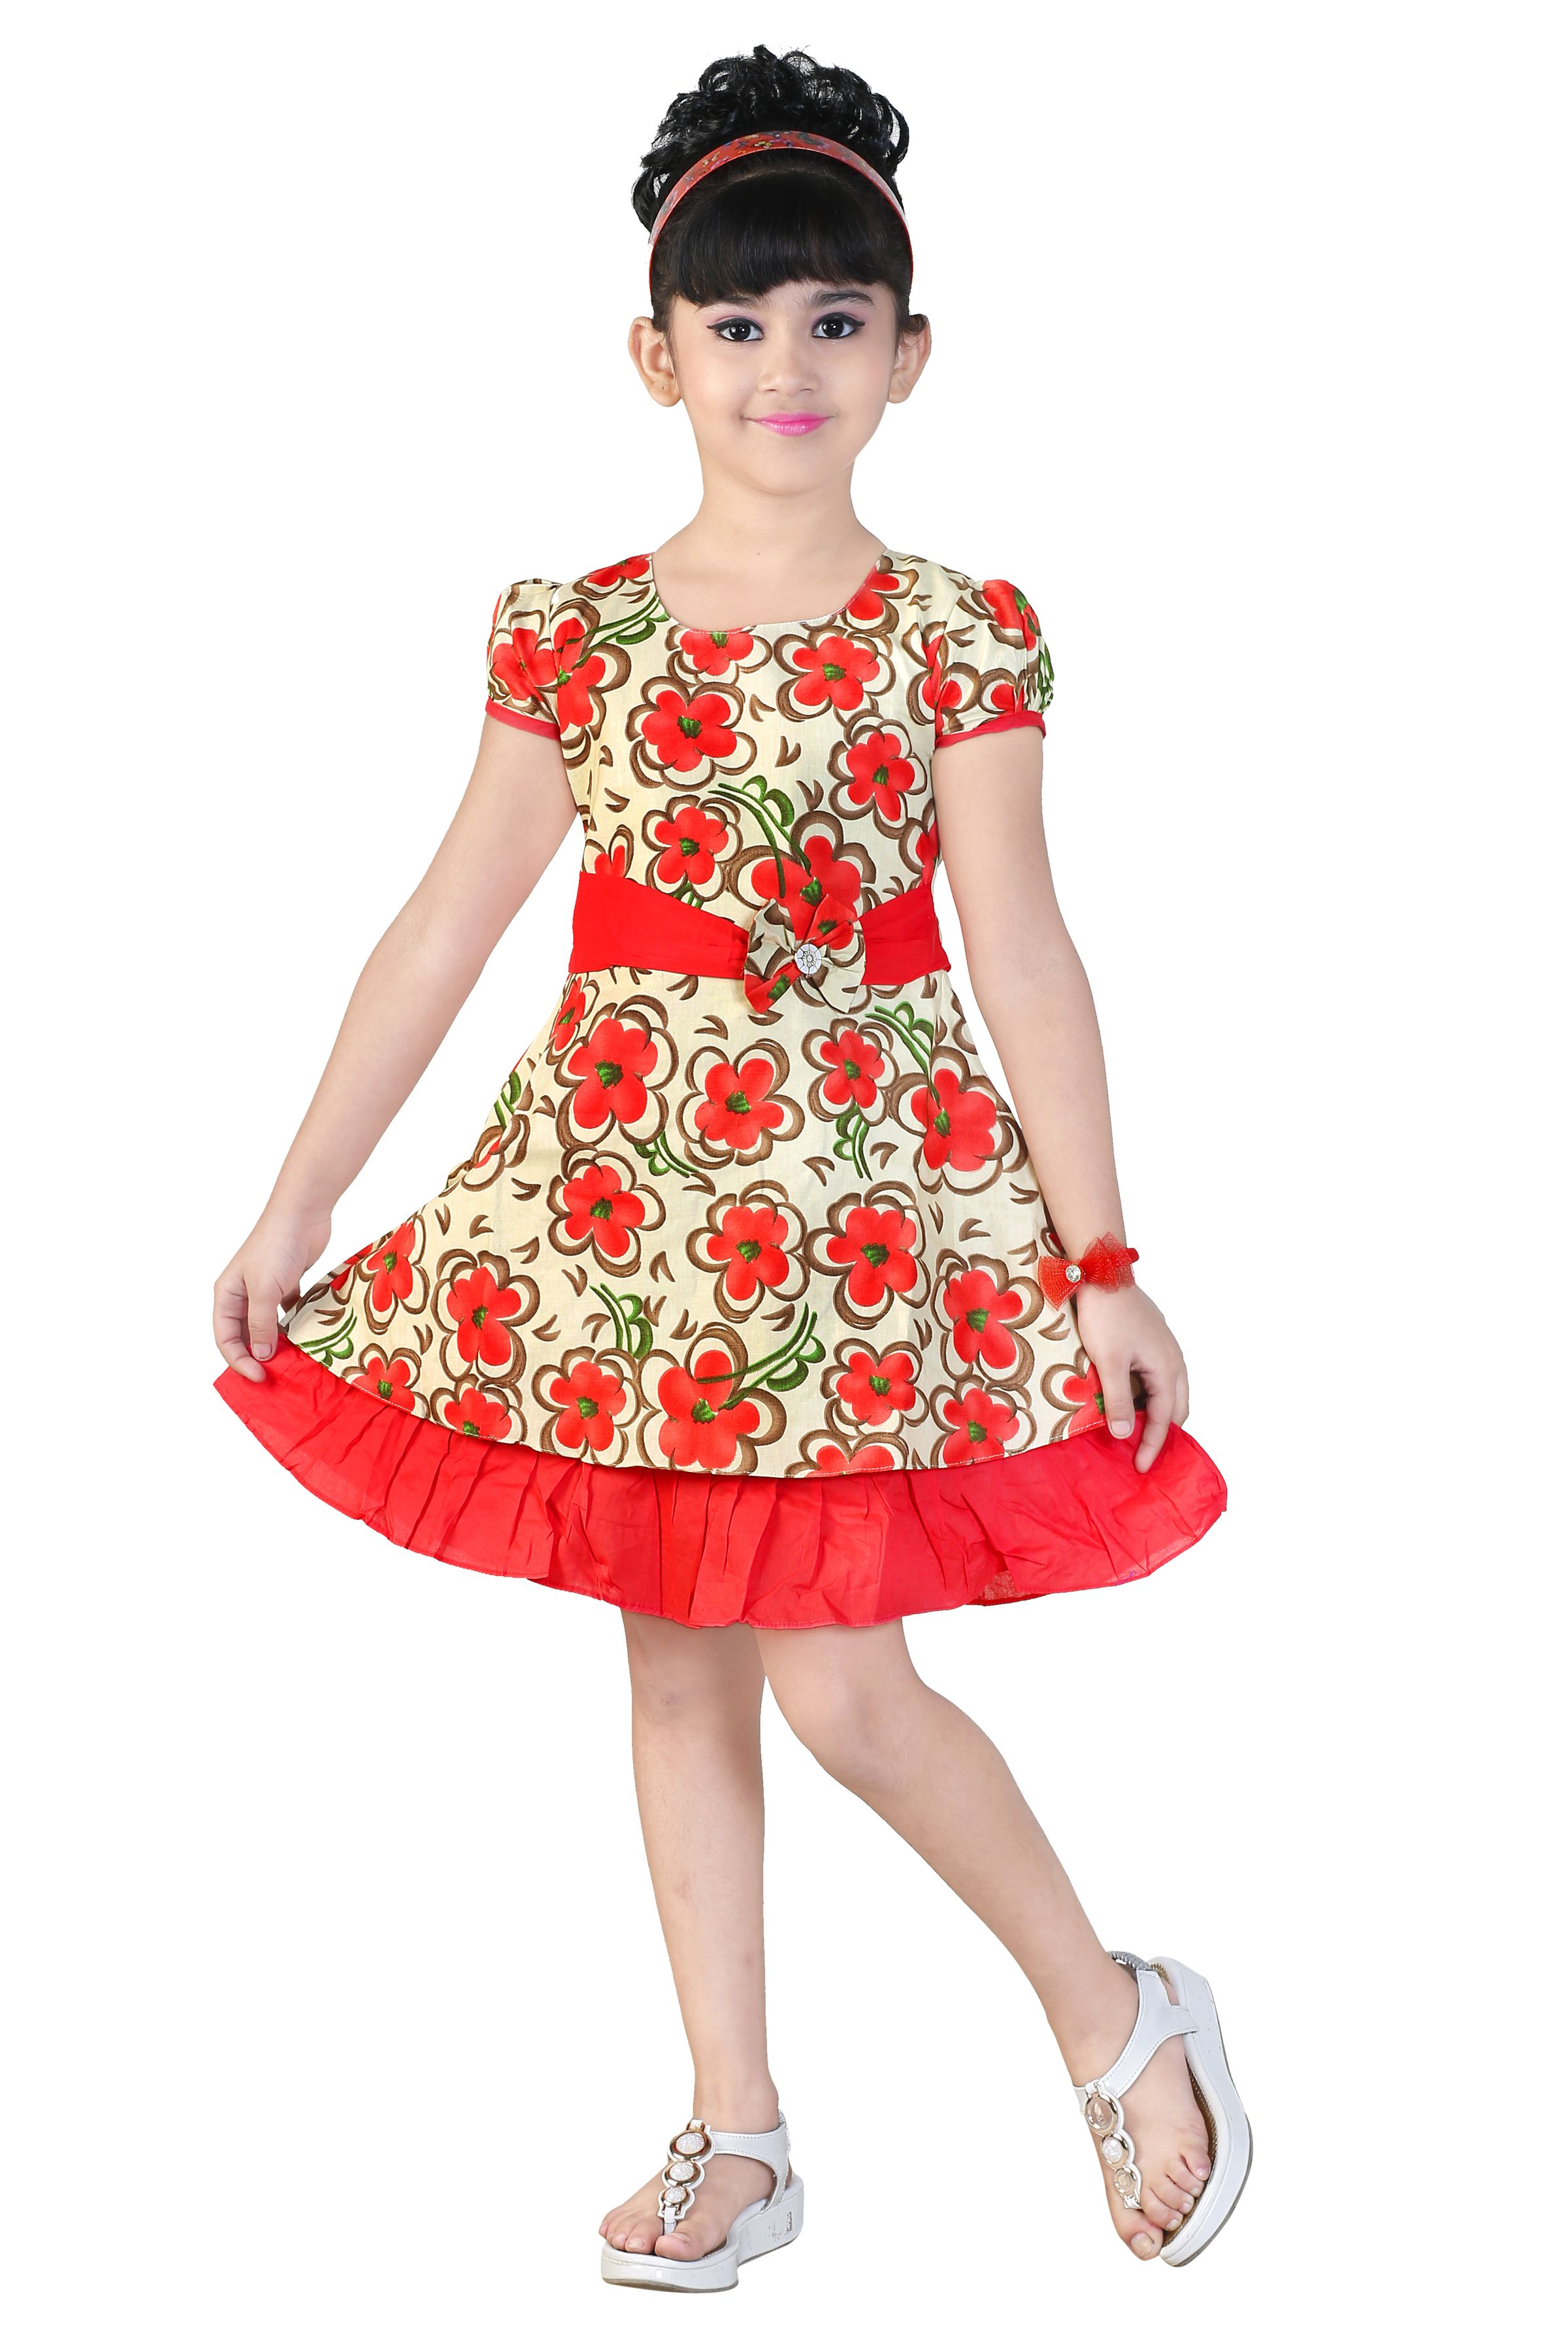 Zadums Girls Cotton A-Line Frock,Red - Buy Zadums Girls Cotton A-Line ...